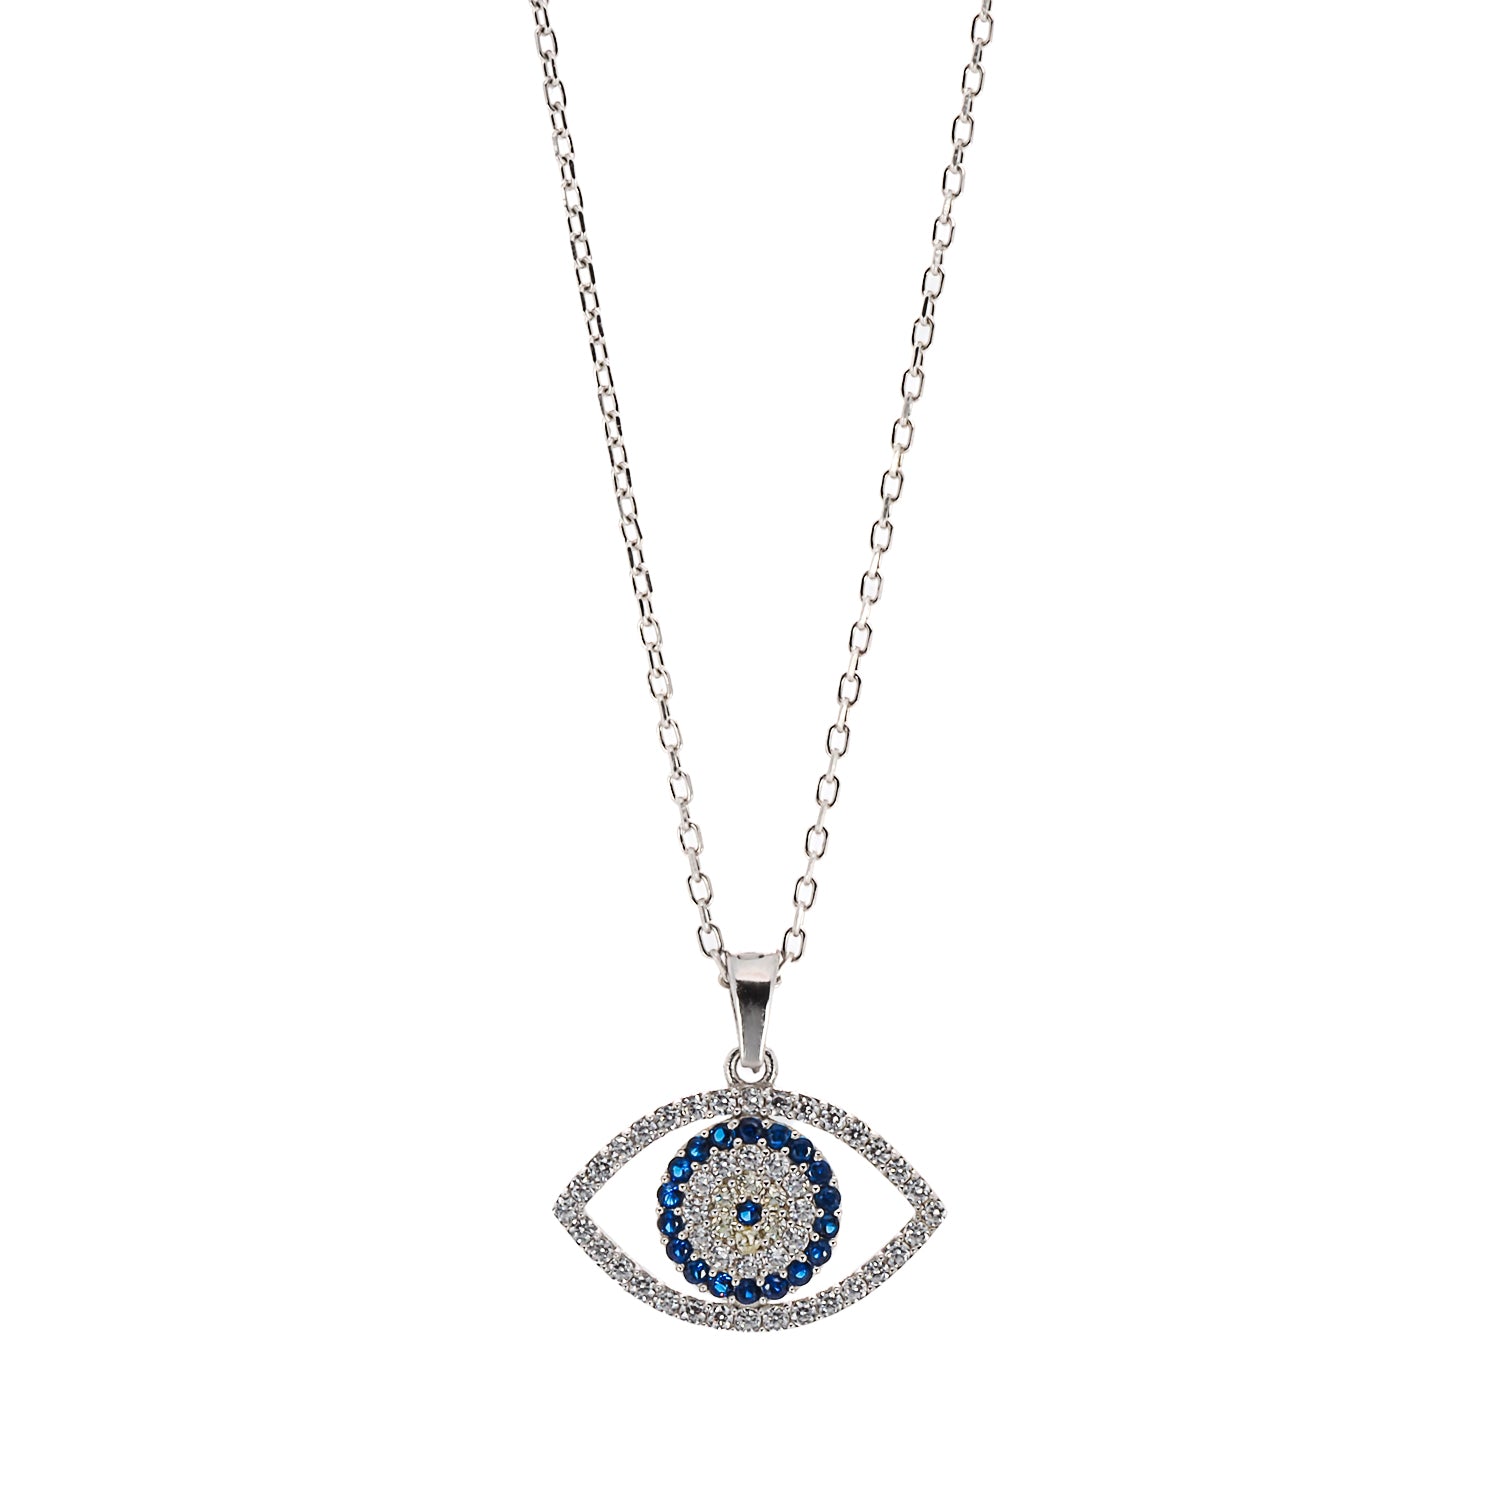 The Sparkly Evil Eye Necklace, a symbol of protection and spiritual significance.